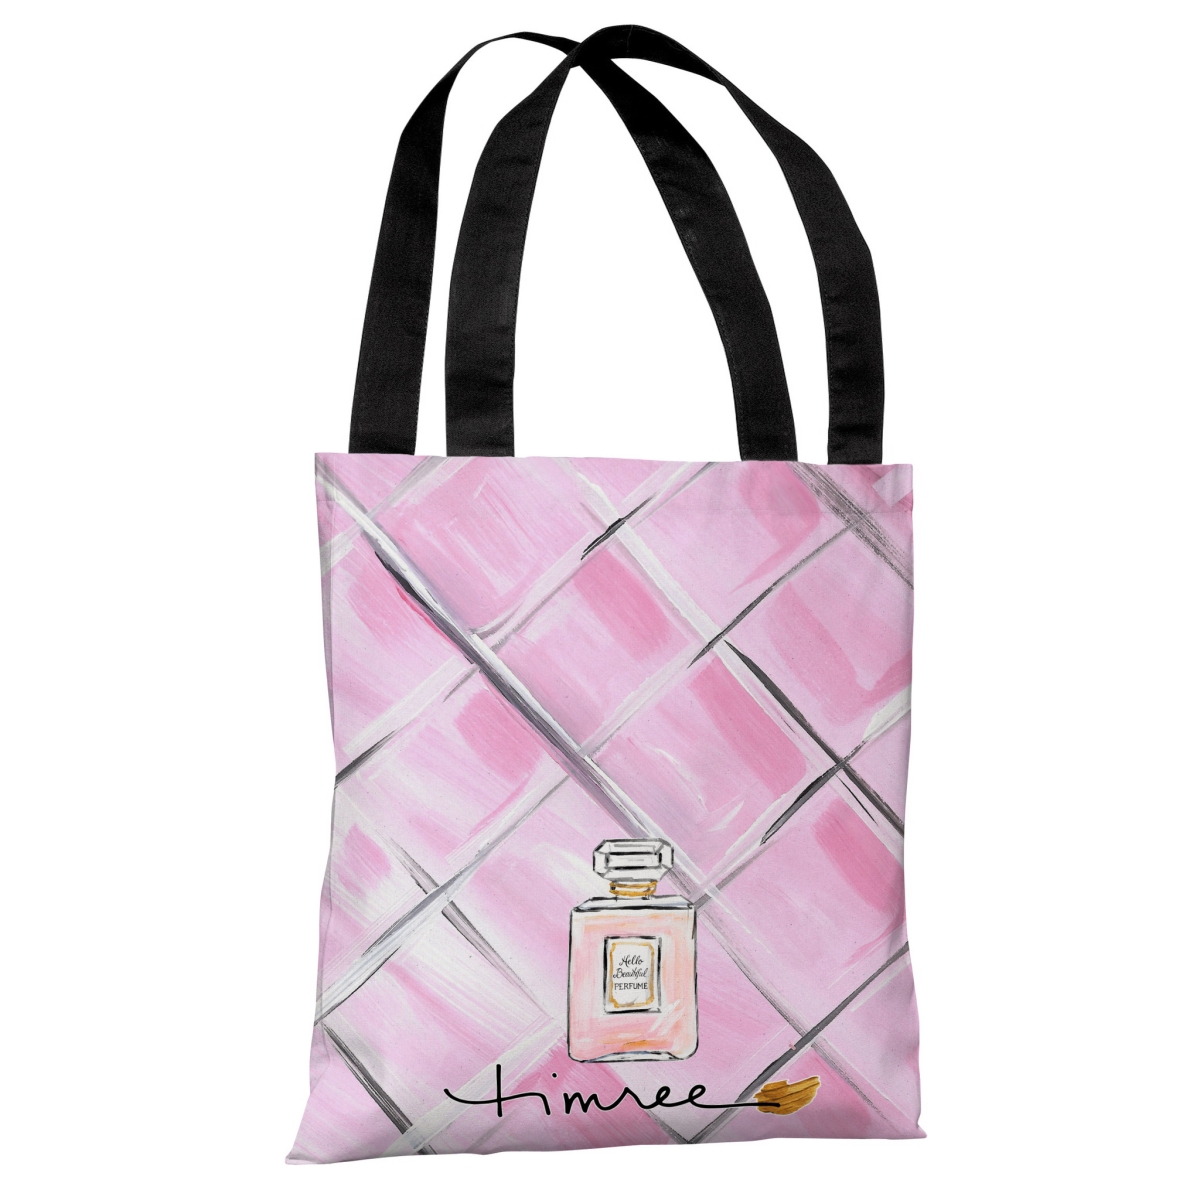 18 In. Bow Perfume & Pink Quilted Polyester Tote Bag By Timree Gold, White